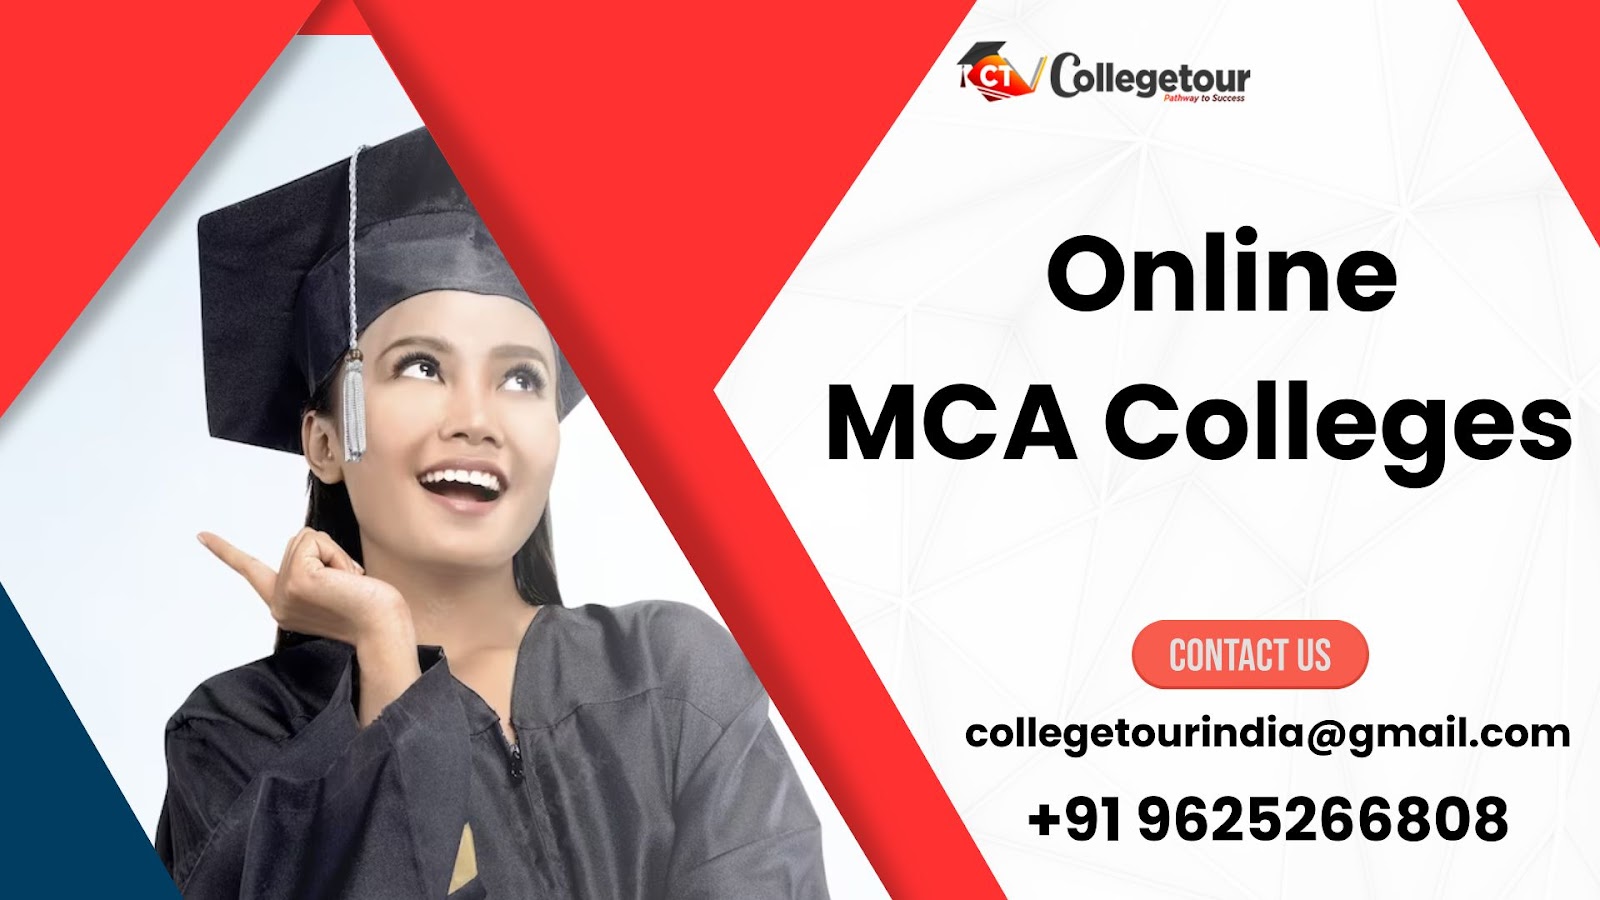 Ever dream of a computer application master? Stop your wait is over now, Well Online MCA Colleges our hassle-free education system provide you with in-depth study materials from respected professors across the globe.  where you are, Online MCA Colleges empower you to connect, engage, and learn from industry specialists.  